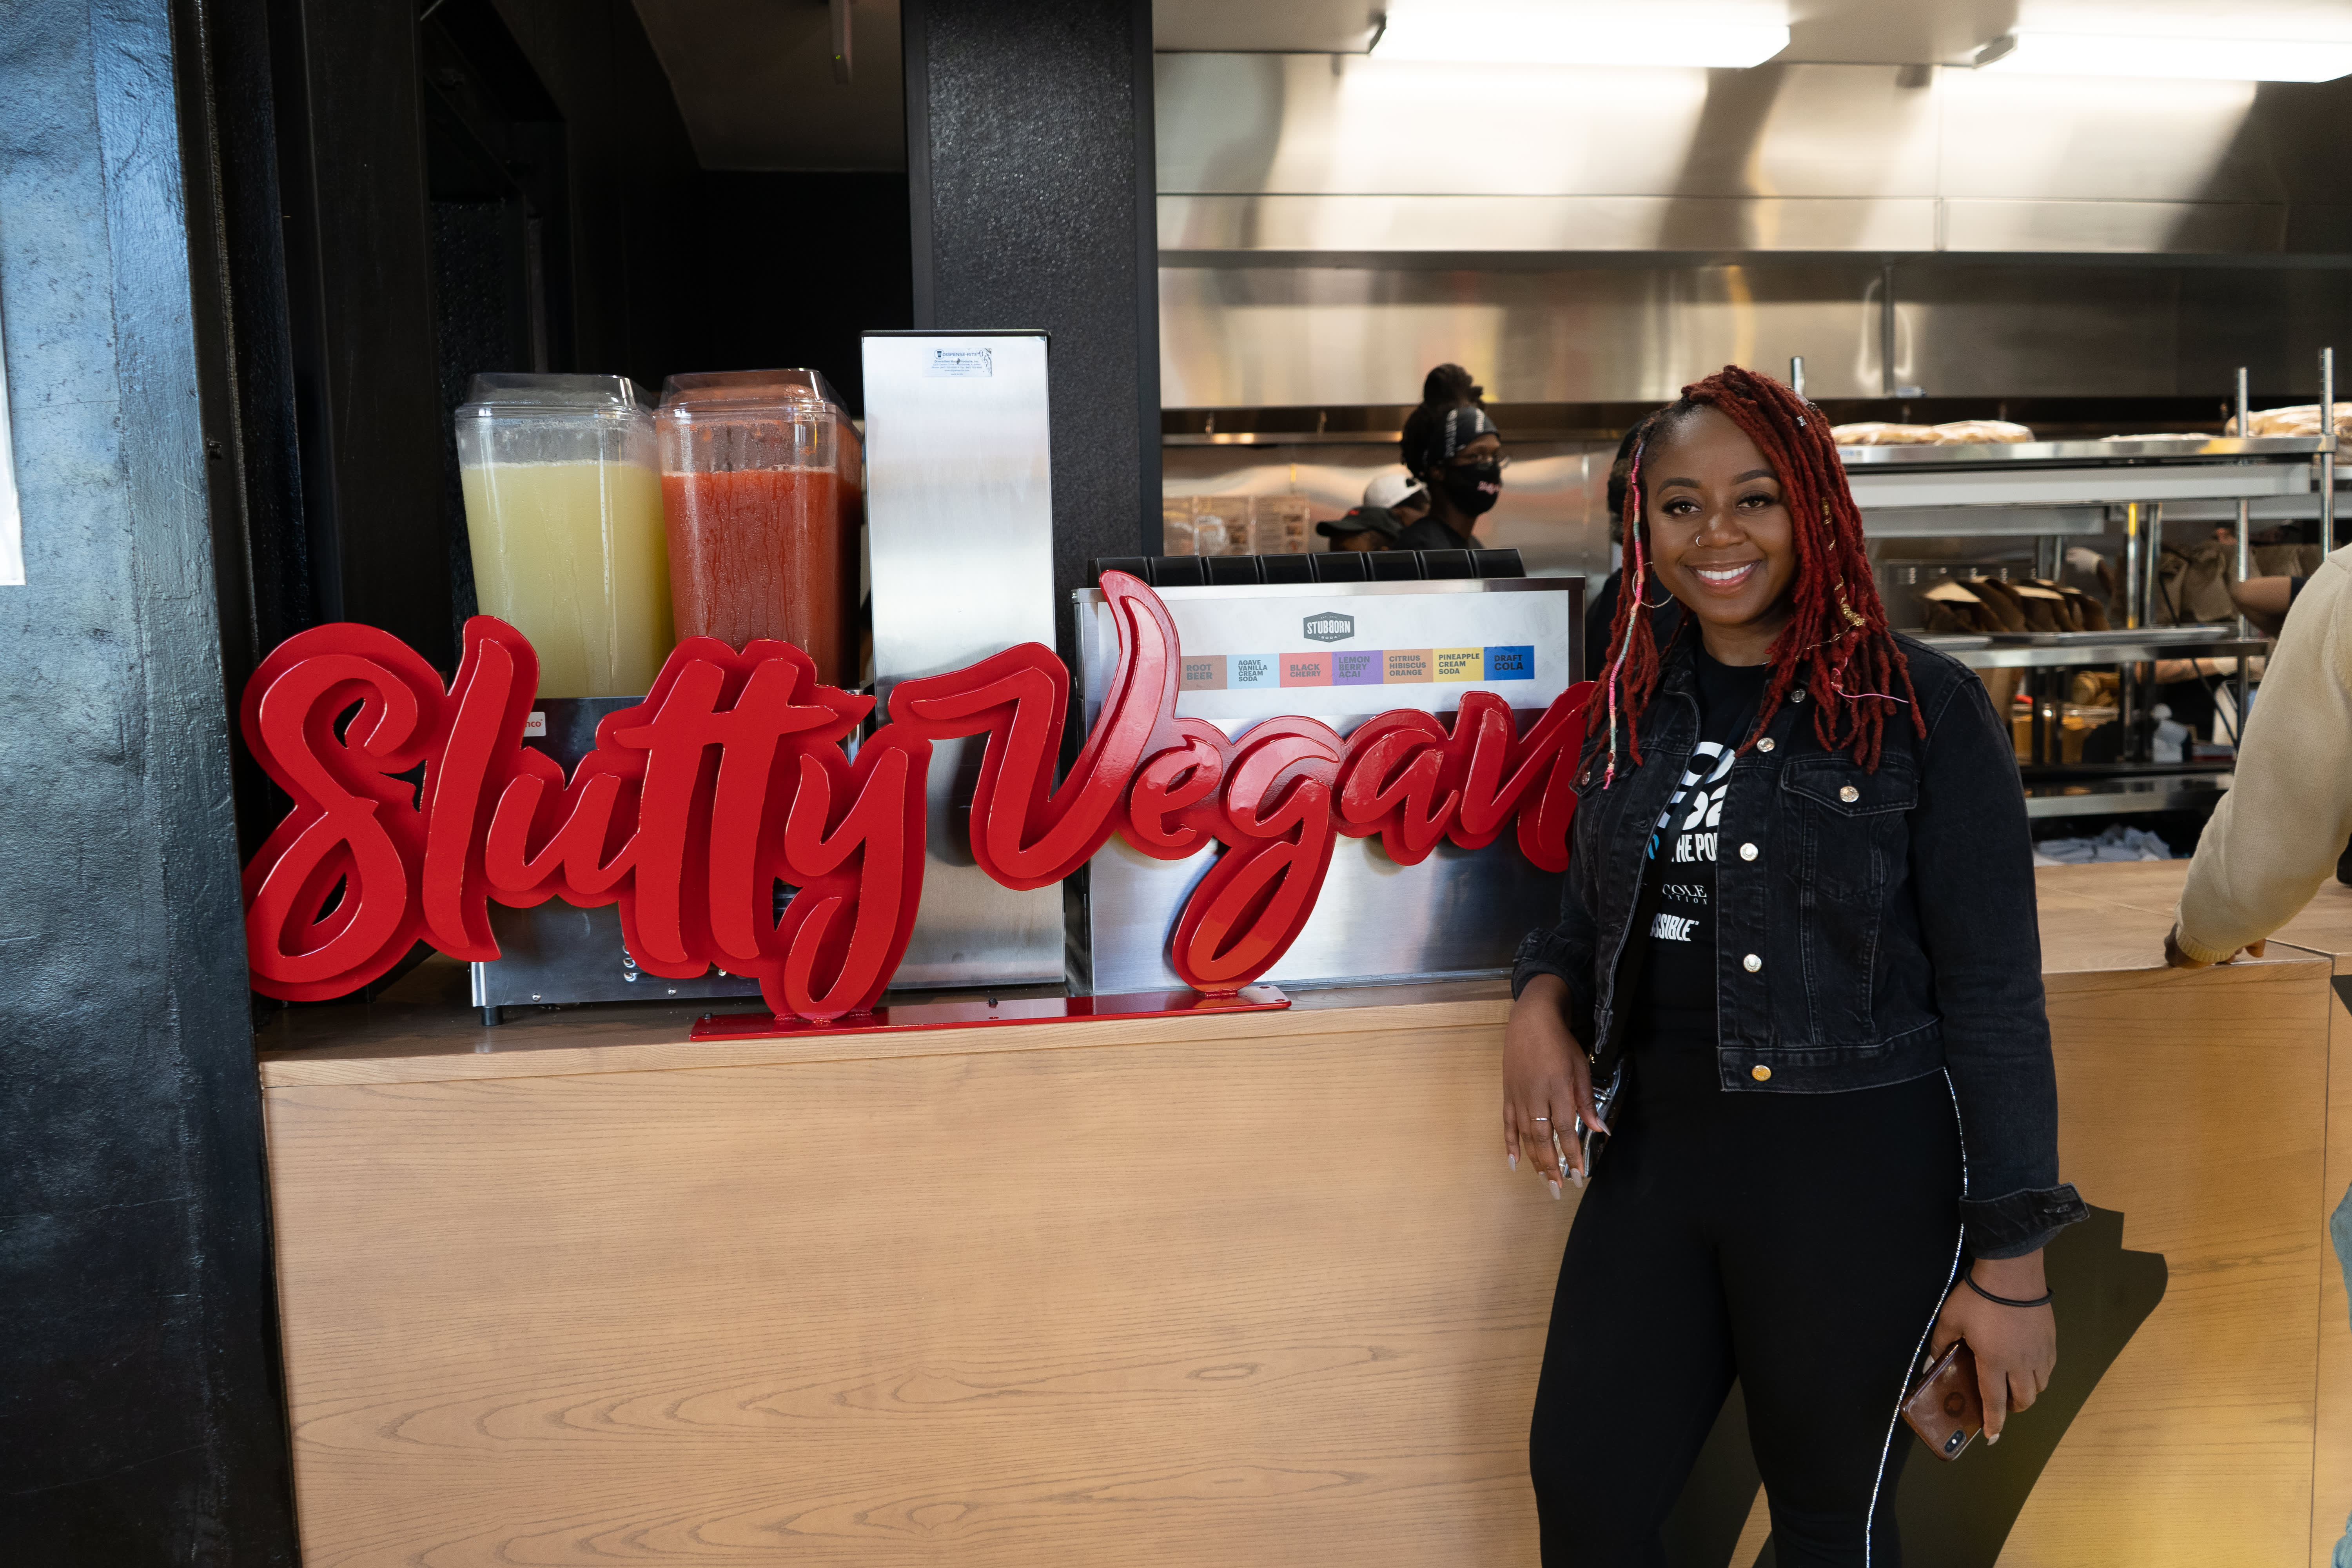 This 34-year-old's first business went up in flames — now she's on a mission to build a billion-dollar vegan burger empire